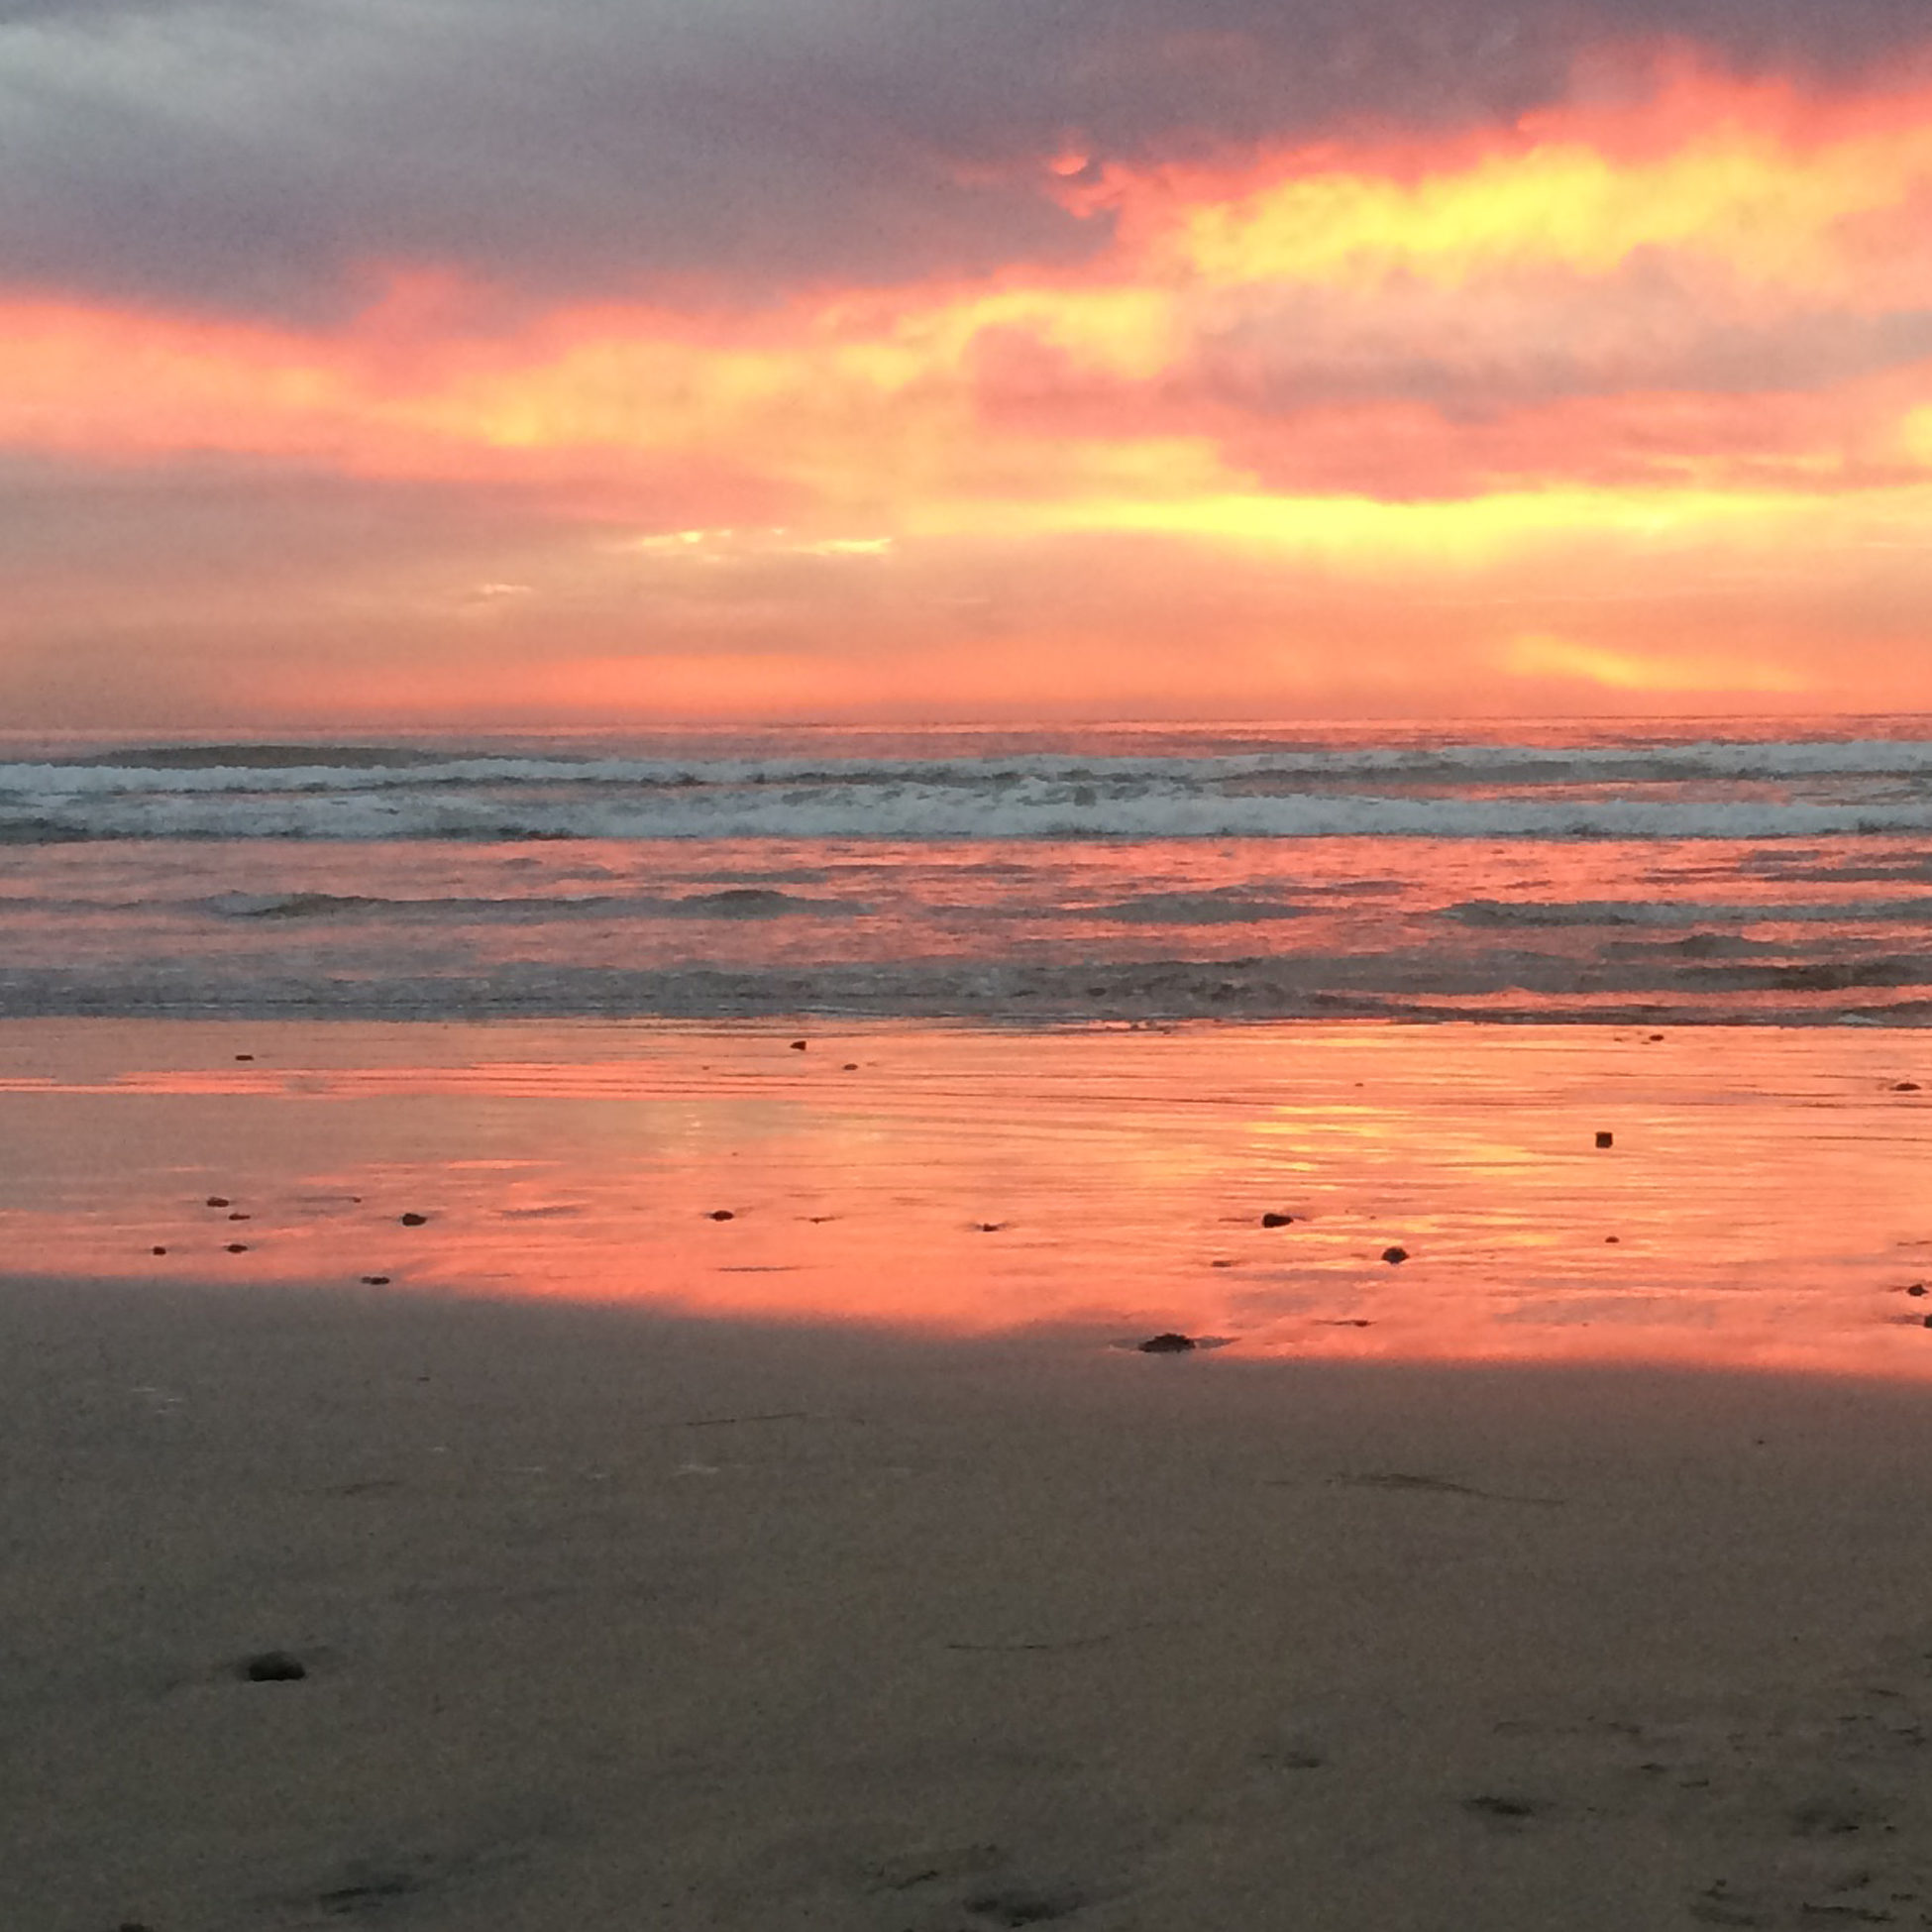 Baja, the beach & San Diego sunsets are why we are San Diegans for life